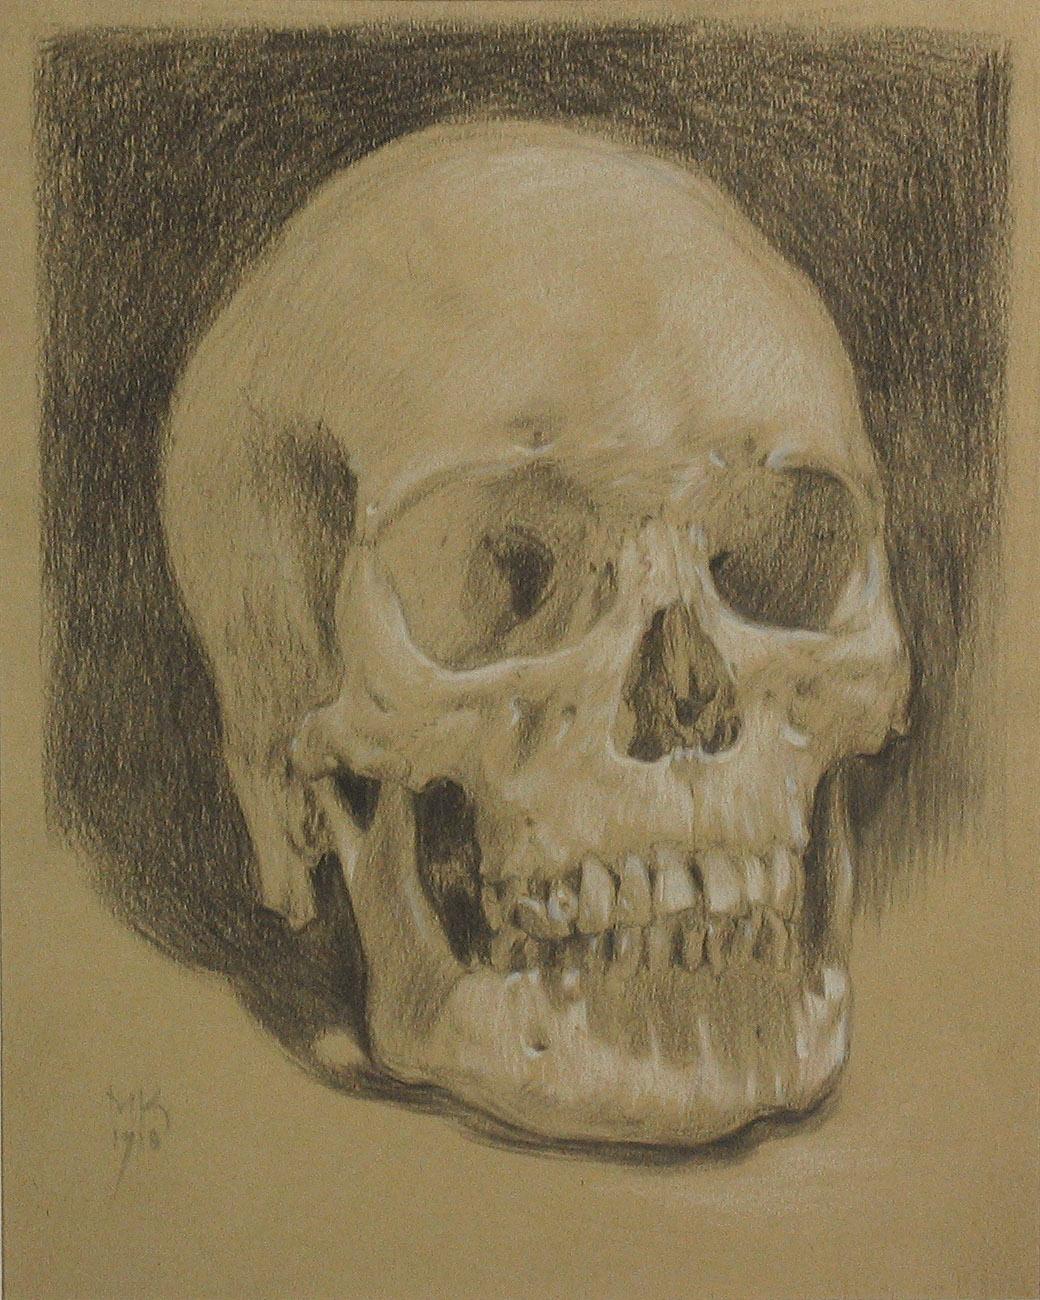 A study of a human skull
Dated 1918.
Measures: Drawing 8 x 6 5/16 in, (20.3 x 16 cm.)
Frame (not glazed), 15 1/2 x 13 1/4 in. (39.4 x 33.6 cm.)
Black chalk heightened with white chalk on buff paper
signed with monogram “MK” and dated 1918.

 